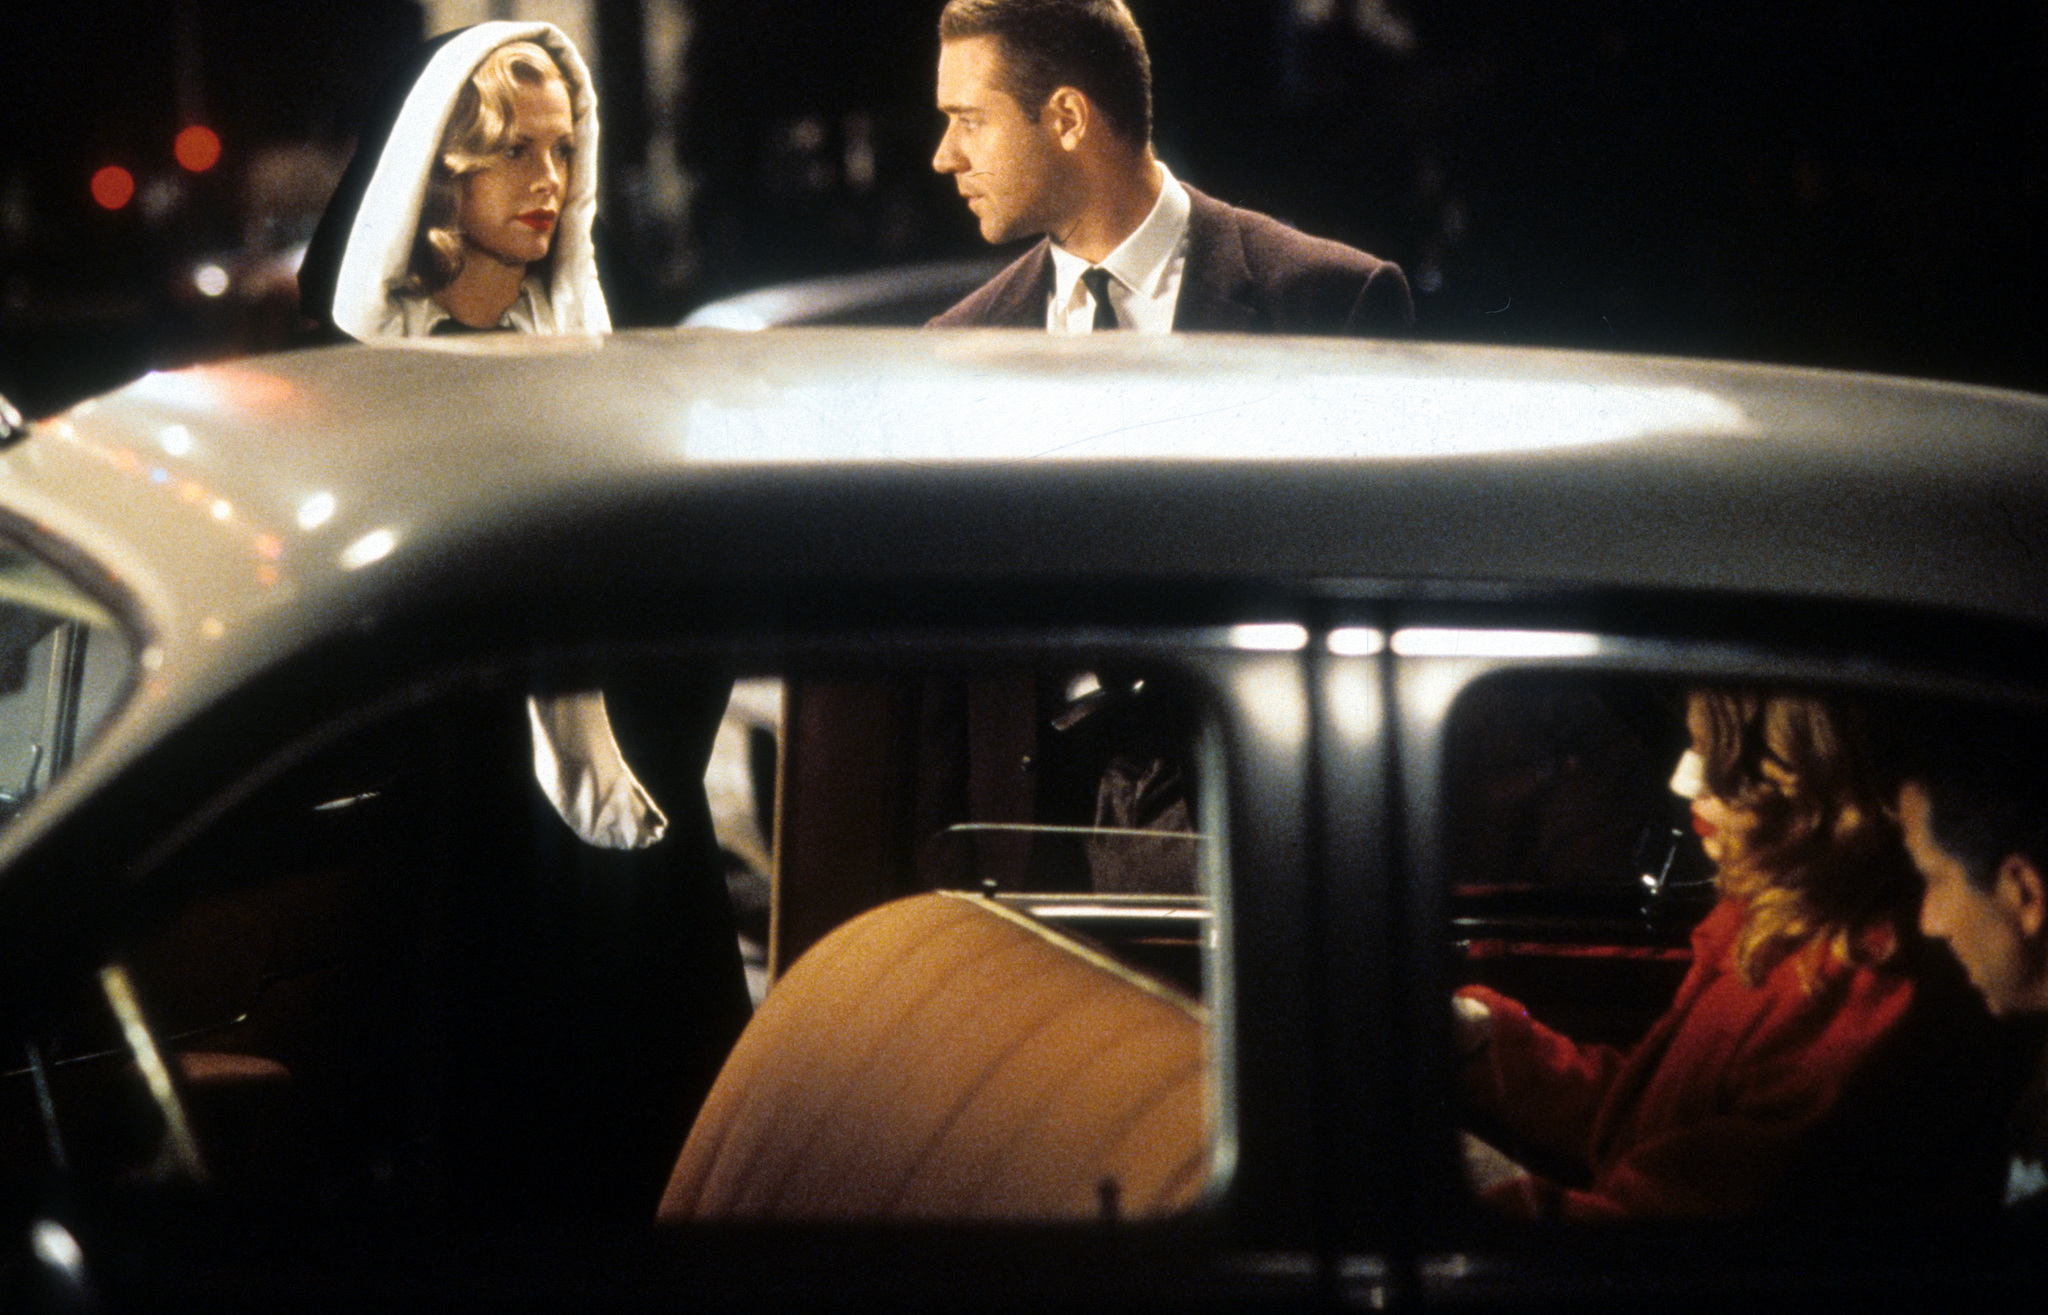 Kim Basinger, Russell Crowe, David Strathairn, and Amber Smith in L.A. Confidential (1997)